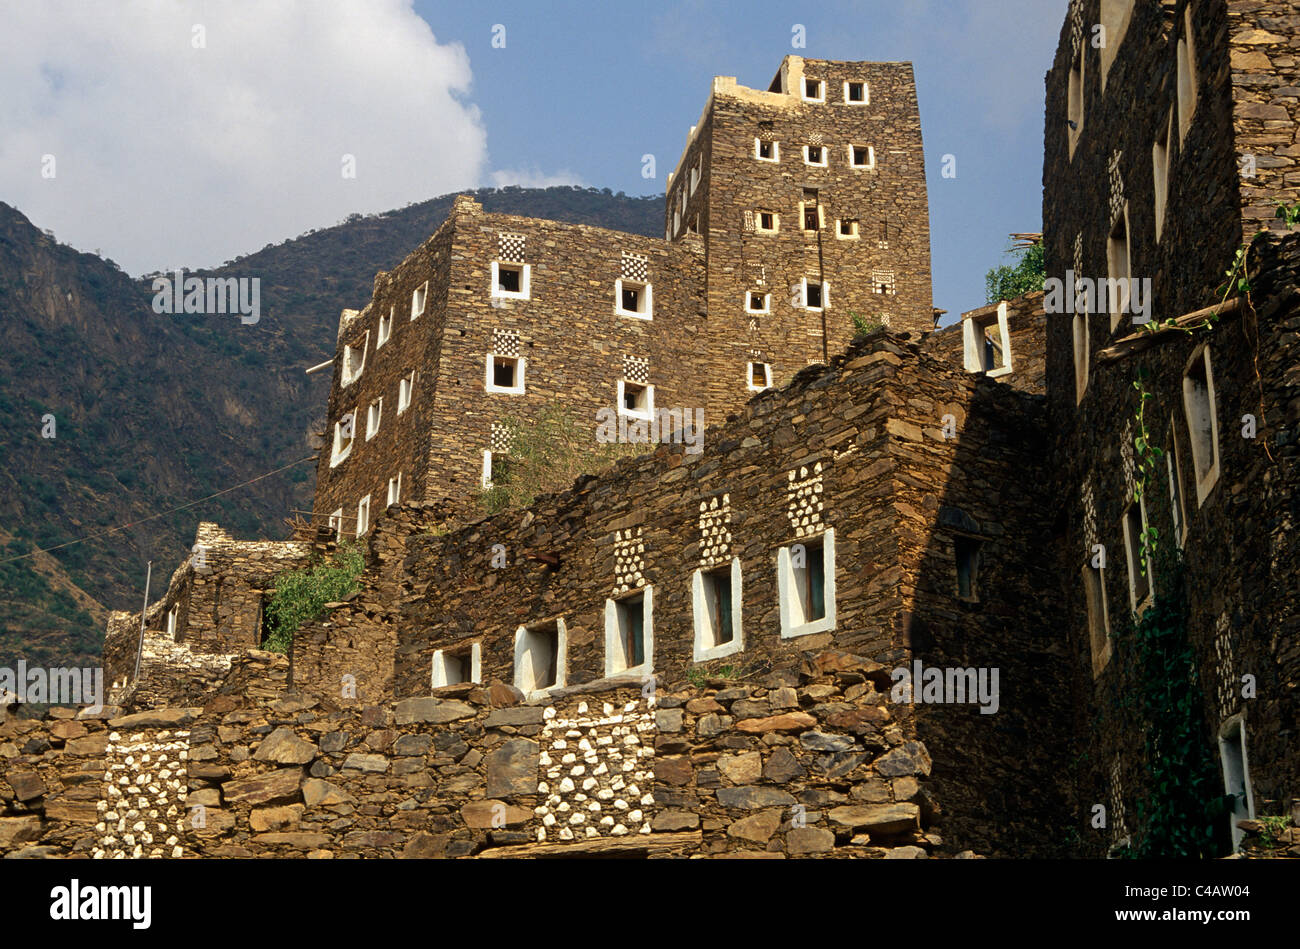 Saudi Arabia, Asir, Rejal- al-amaa. Standing in the Asir Mountains and recently part-restored, the village of Rejal al-Maa's Stock Photo